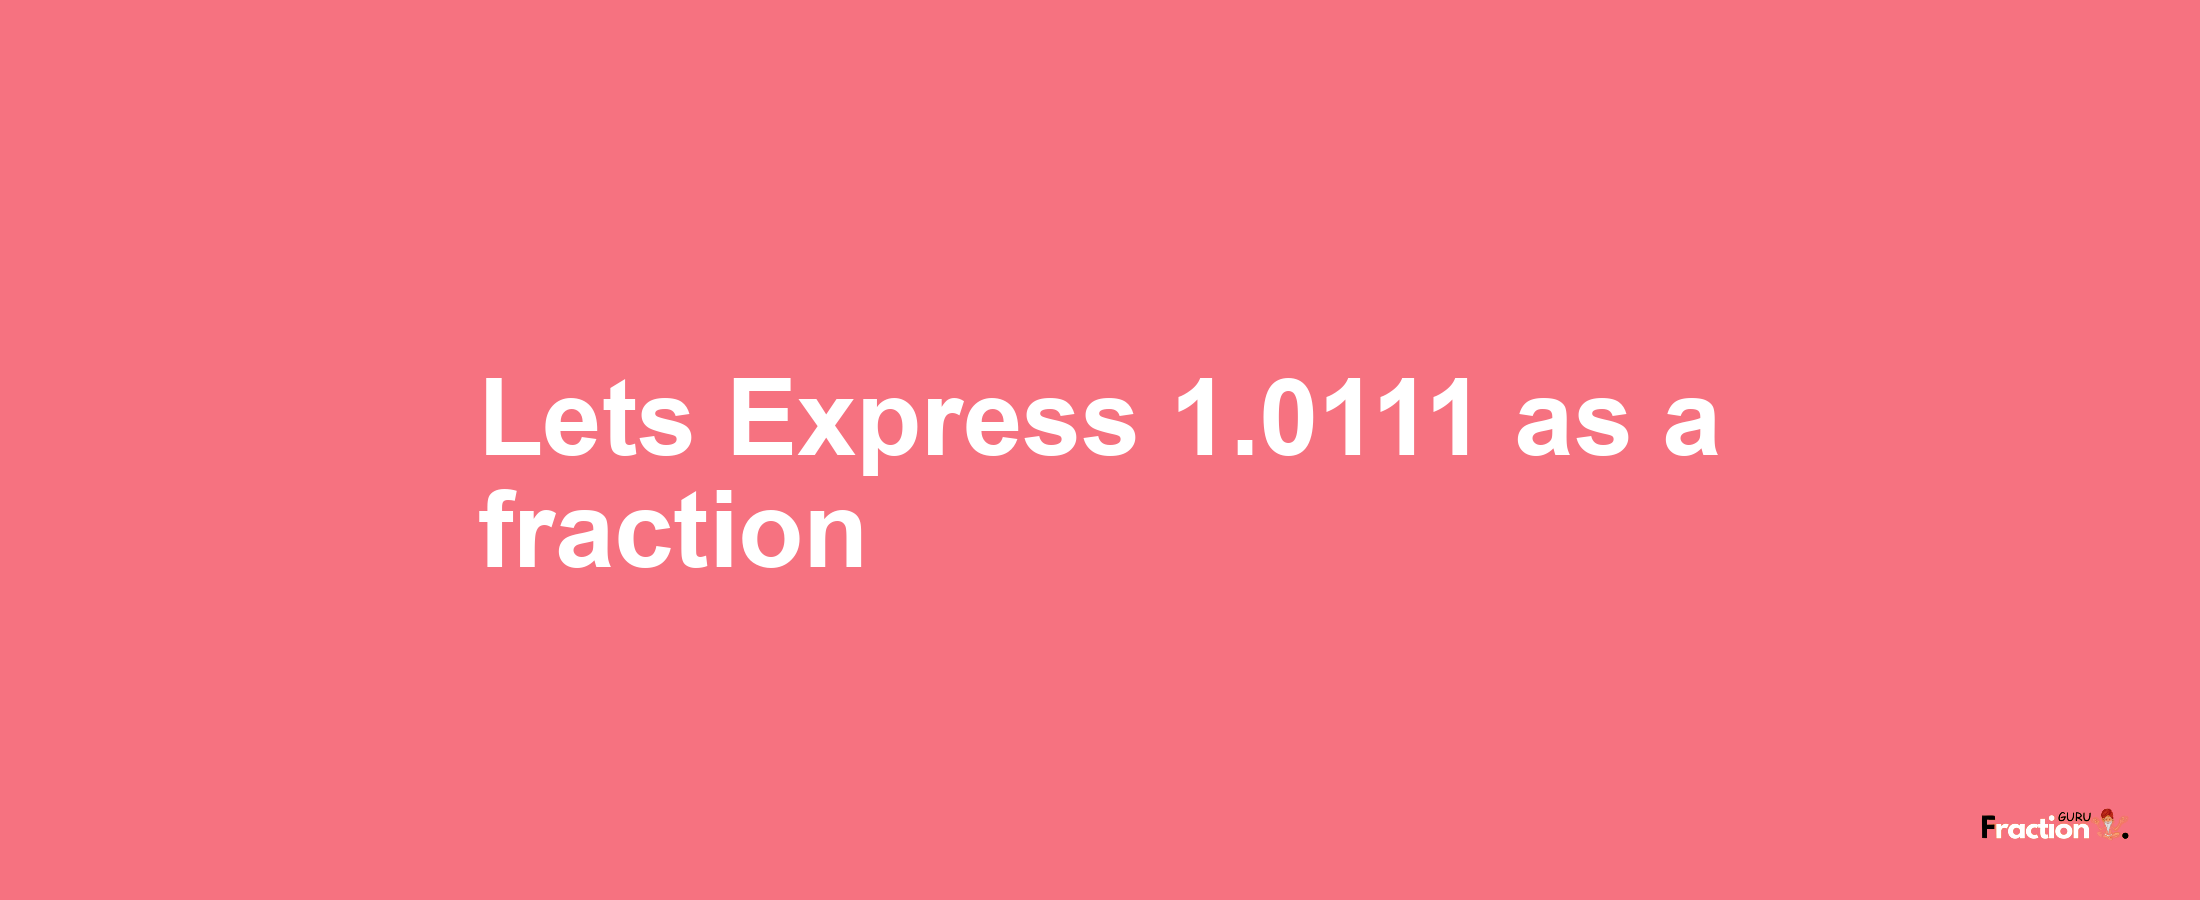 Lets Express 1.0111 as afraction